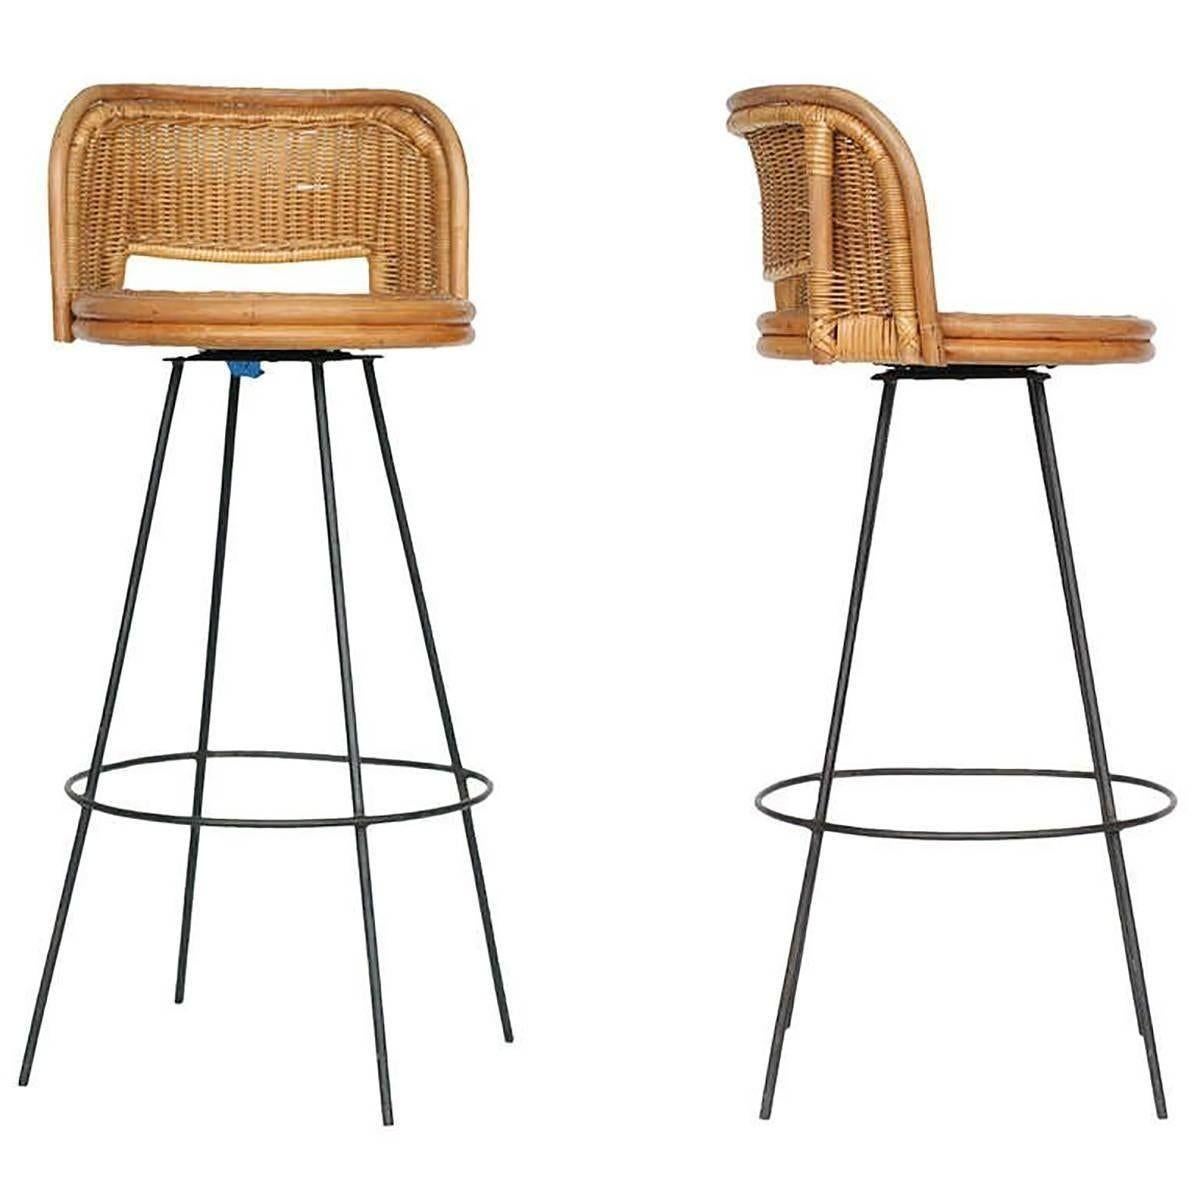 Seng of Chicago rattan and metal swivel bar stool set of 3 with seat backs. This delicate combination of rattan and metal is a perfect match for any midcentury home or Tropical getaway. The rattan shows no signs of wear or breaks.
 
The metal